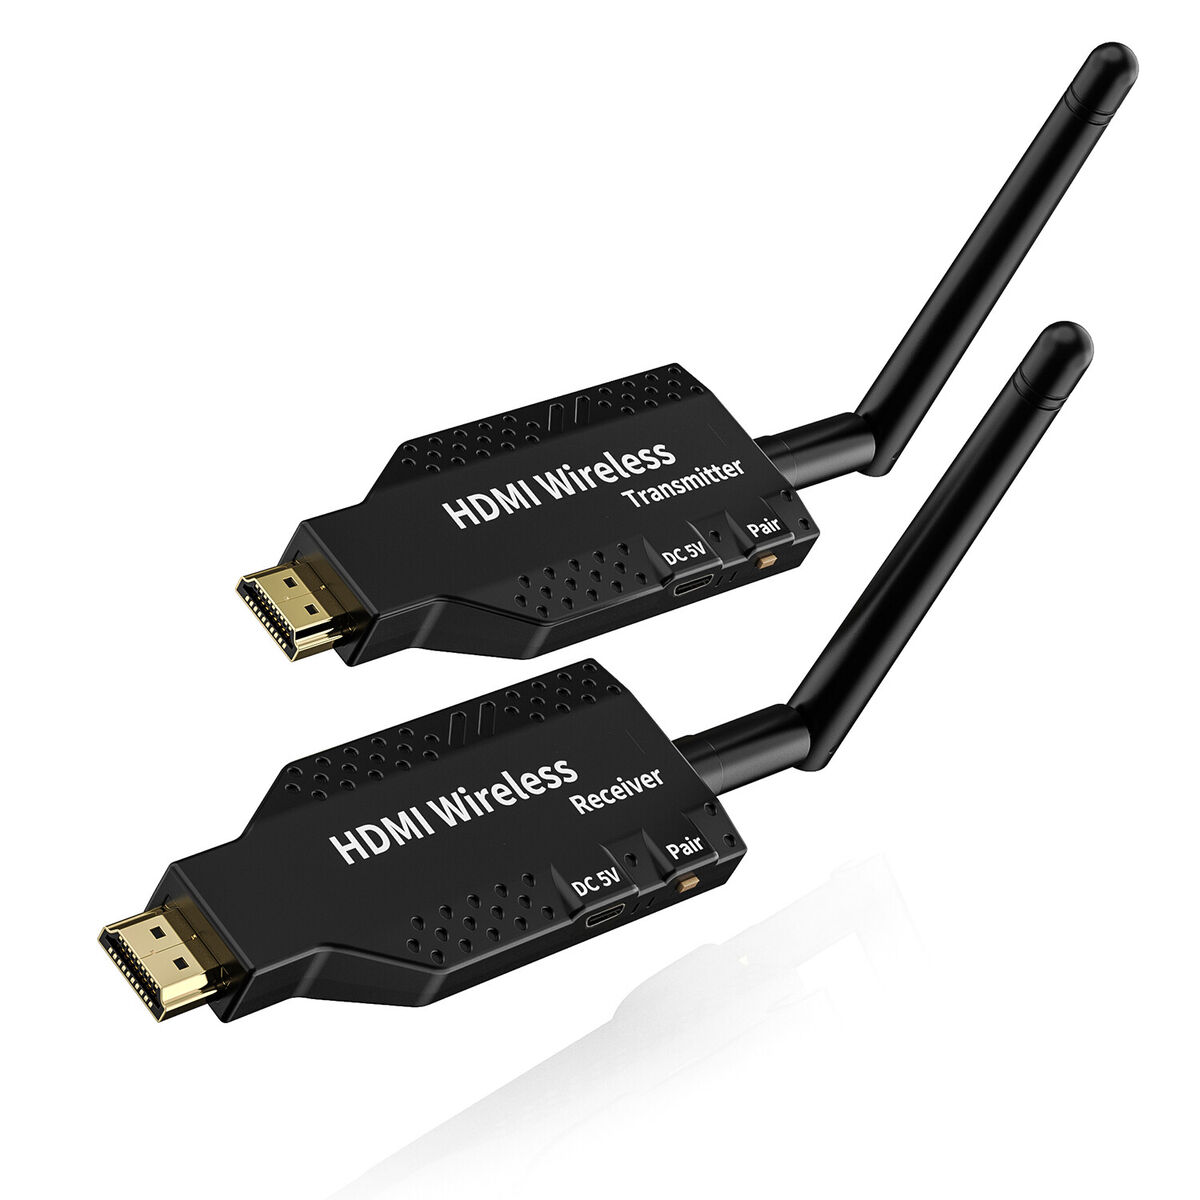 hdmi transmitter and receiver